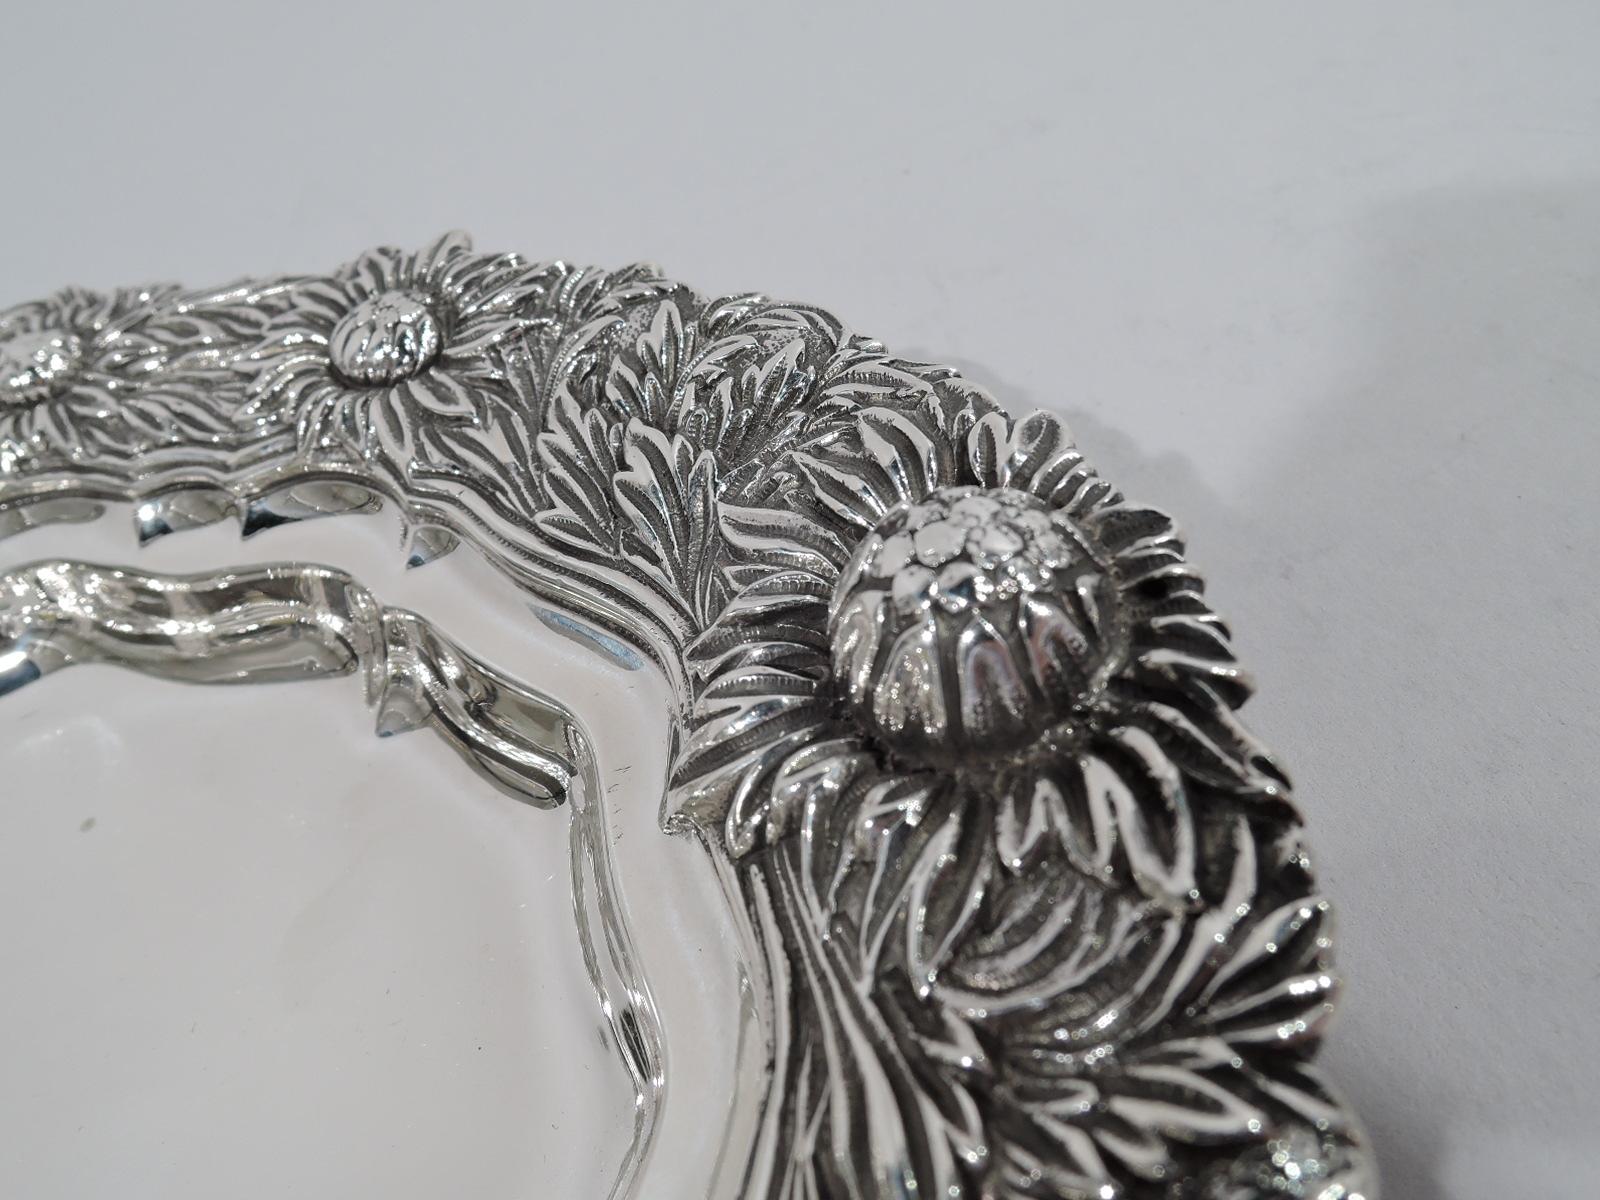 Tiffany Sterling Silver Serving Platter Tray in Desirable Chrysanthemum (Japonismus)